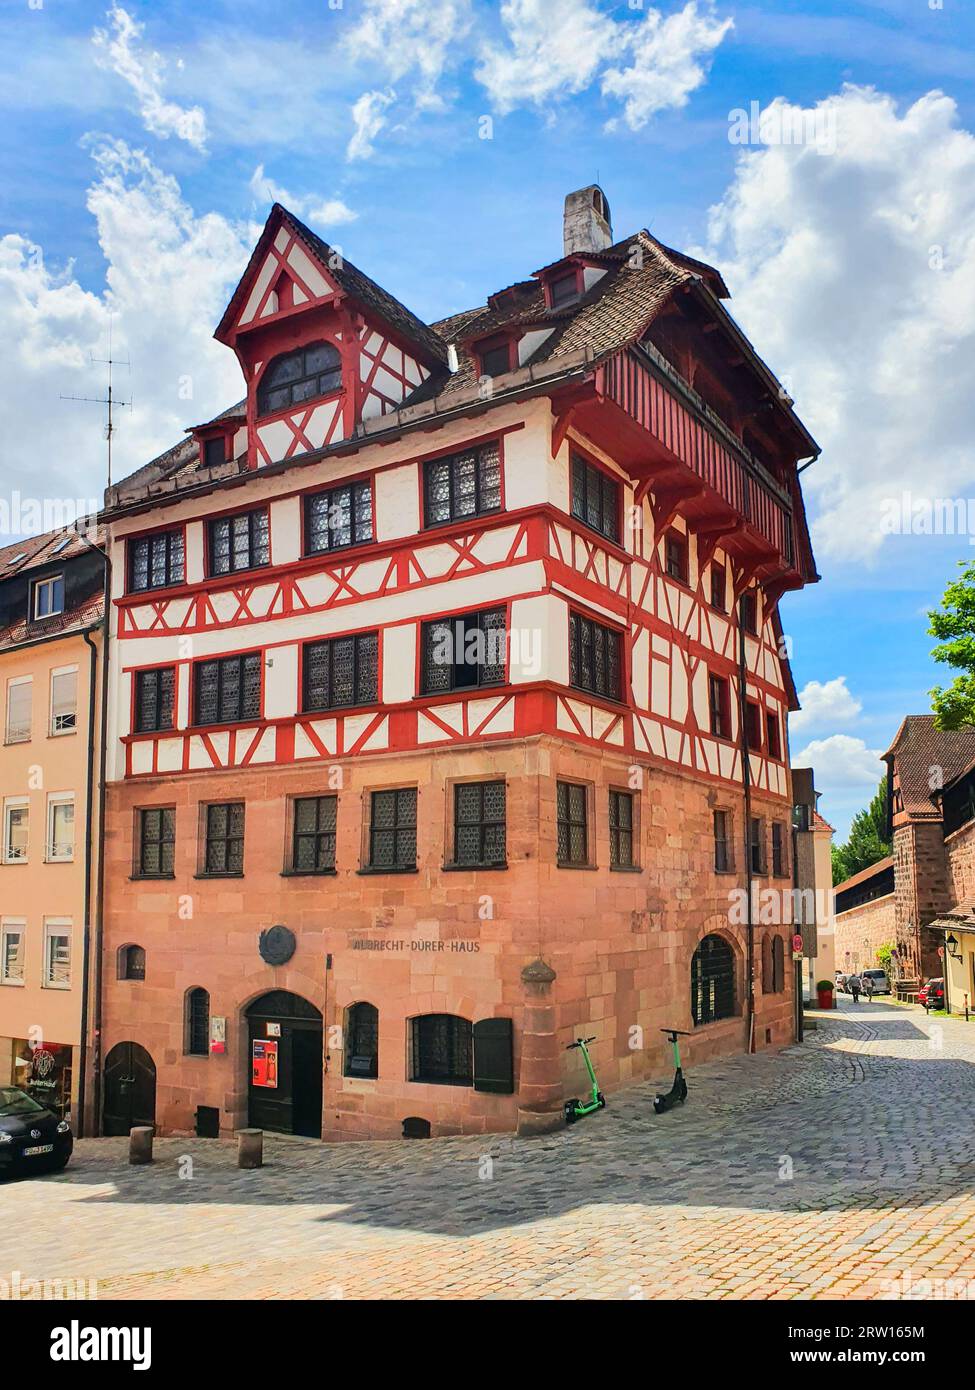 Nuremberg, Germany - July 10, 2021: Albrecht Durer House is a fachwerk house in Nuremberg old town. Nuremberg is the second largest city of Bavaria st Stock Photo